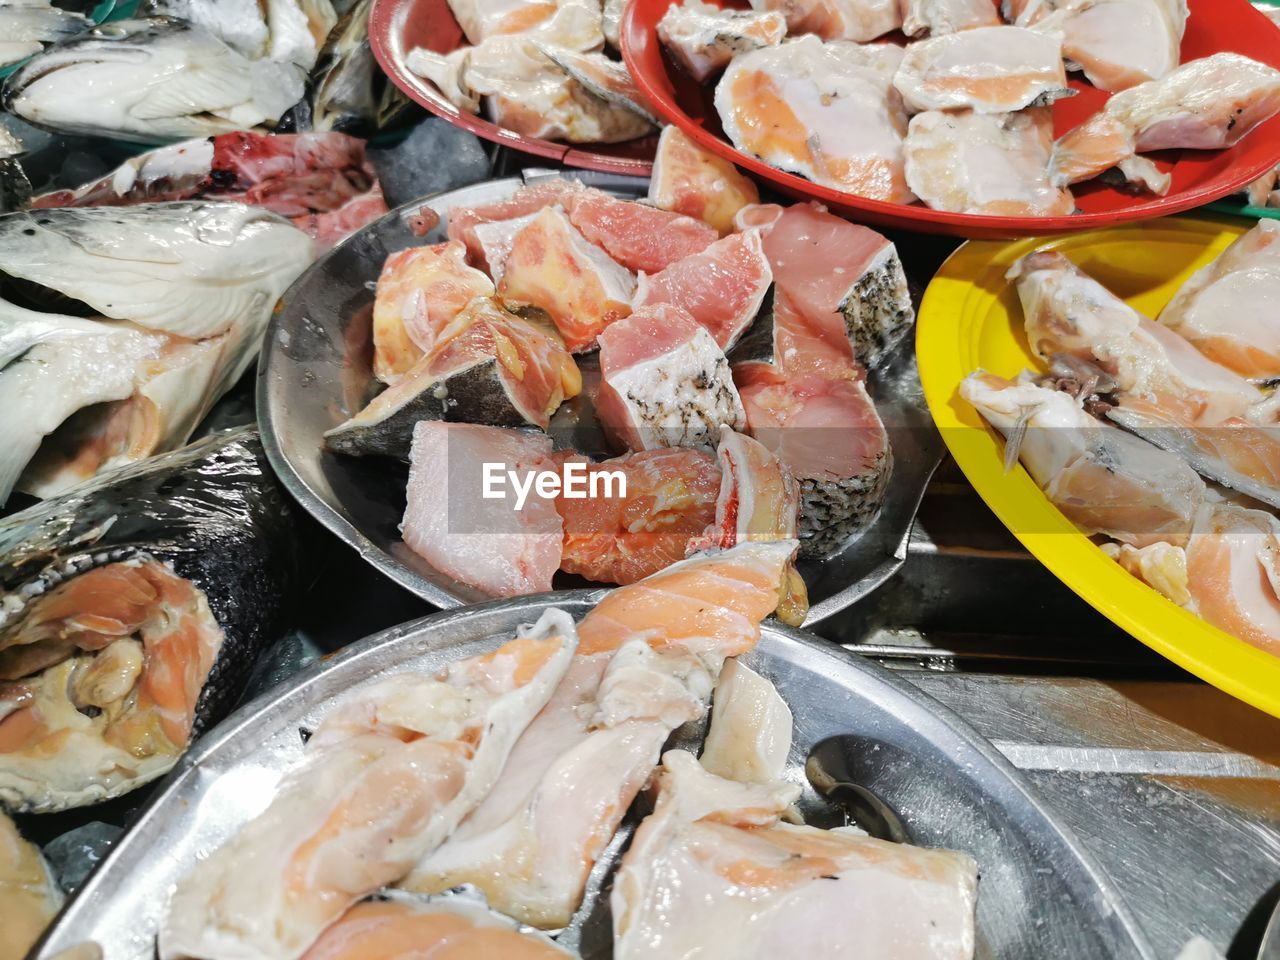 CLOSE-UP OF FISH FOR SALE